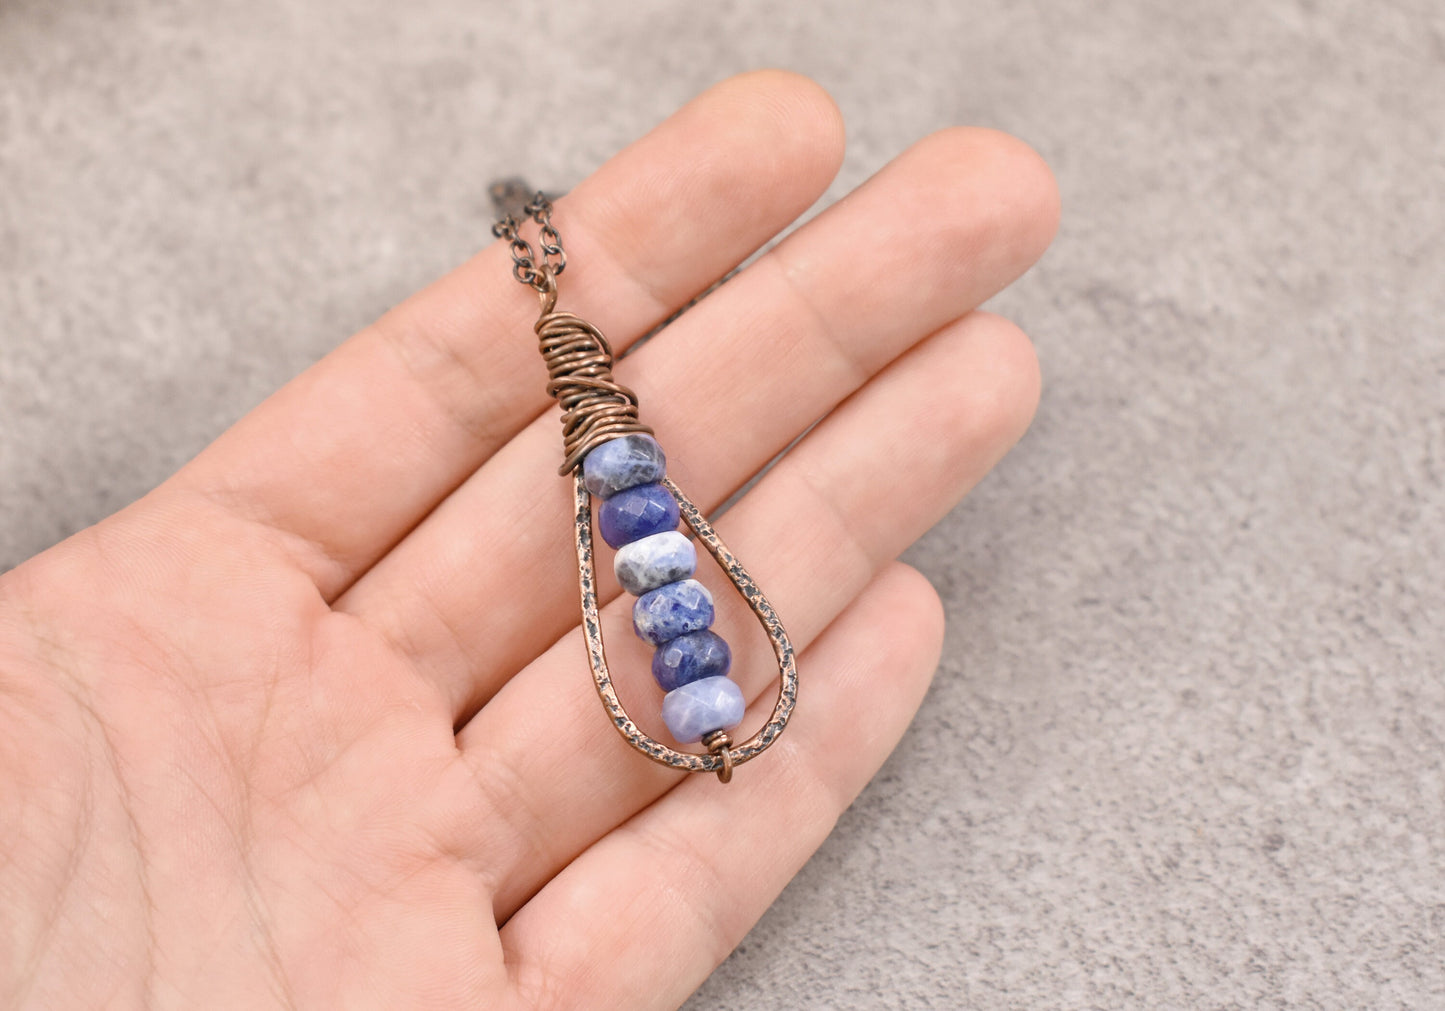 Sodalite Copper Teardrop Necklace, Rustic Blue and White Stone Pendant, Unique Hammered Jewelry Artisan